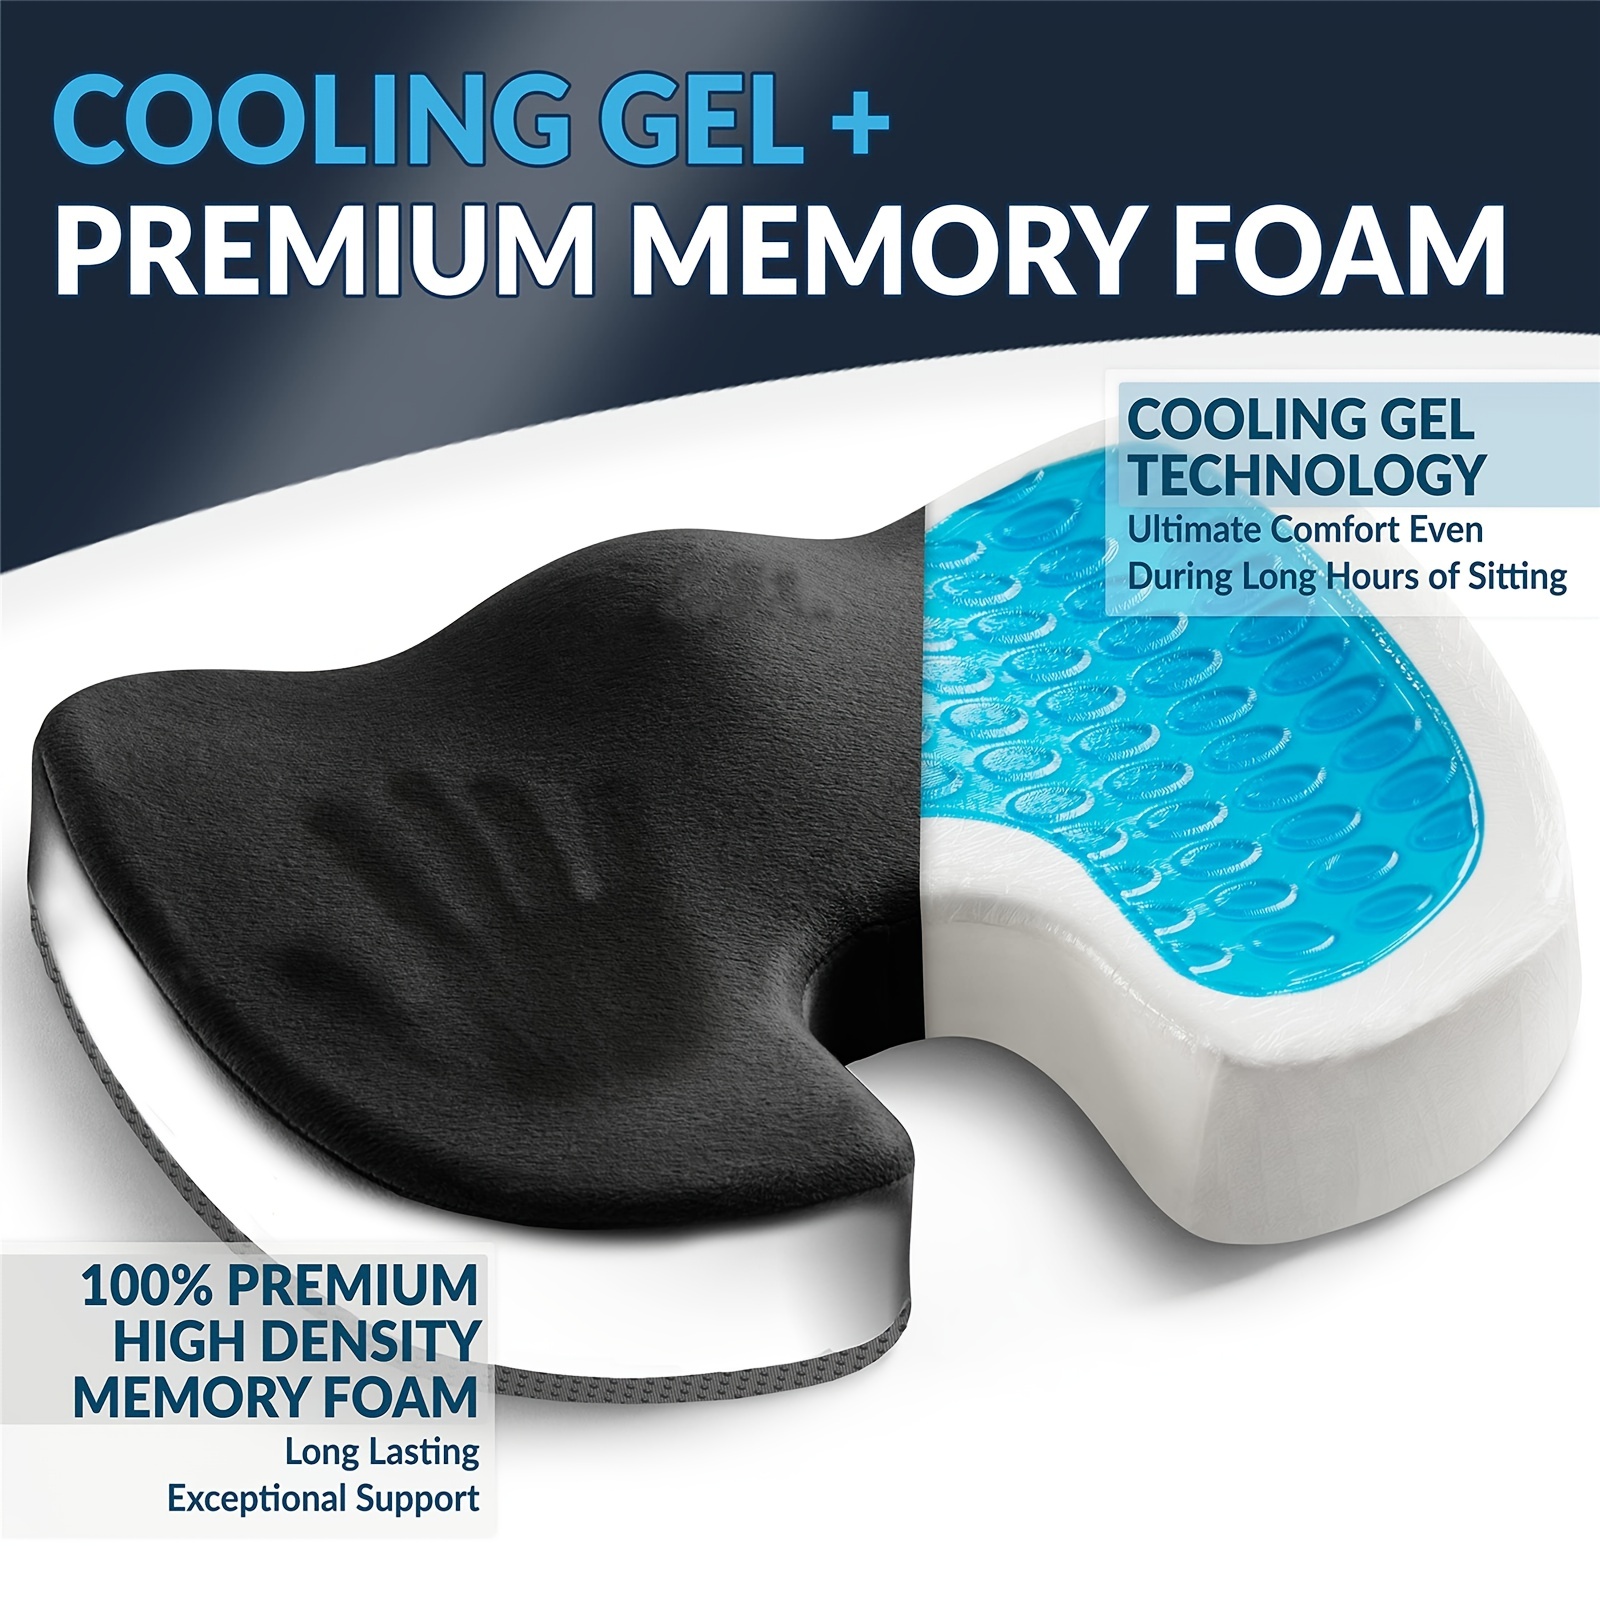 Cooling Gel Memory Foam Seat Cushion, Fabric Cover with Non-Slip